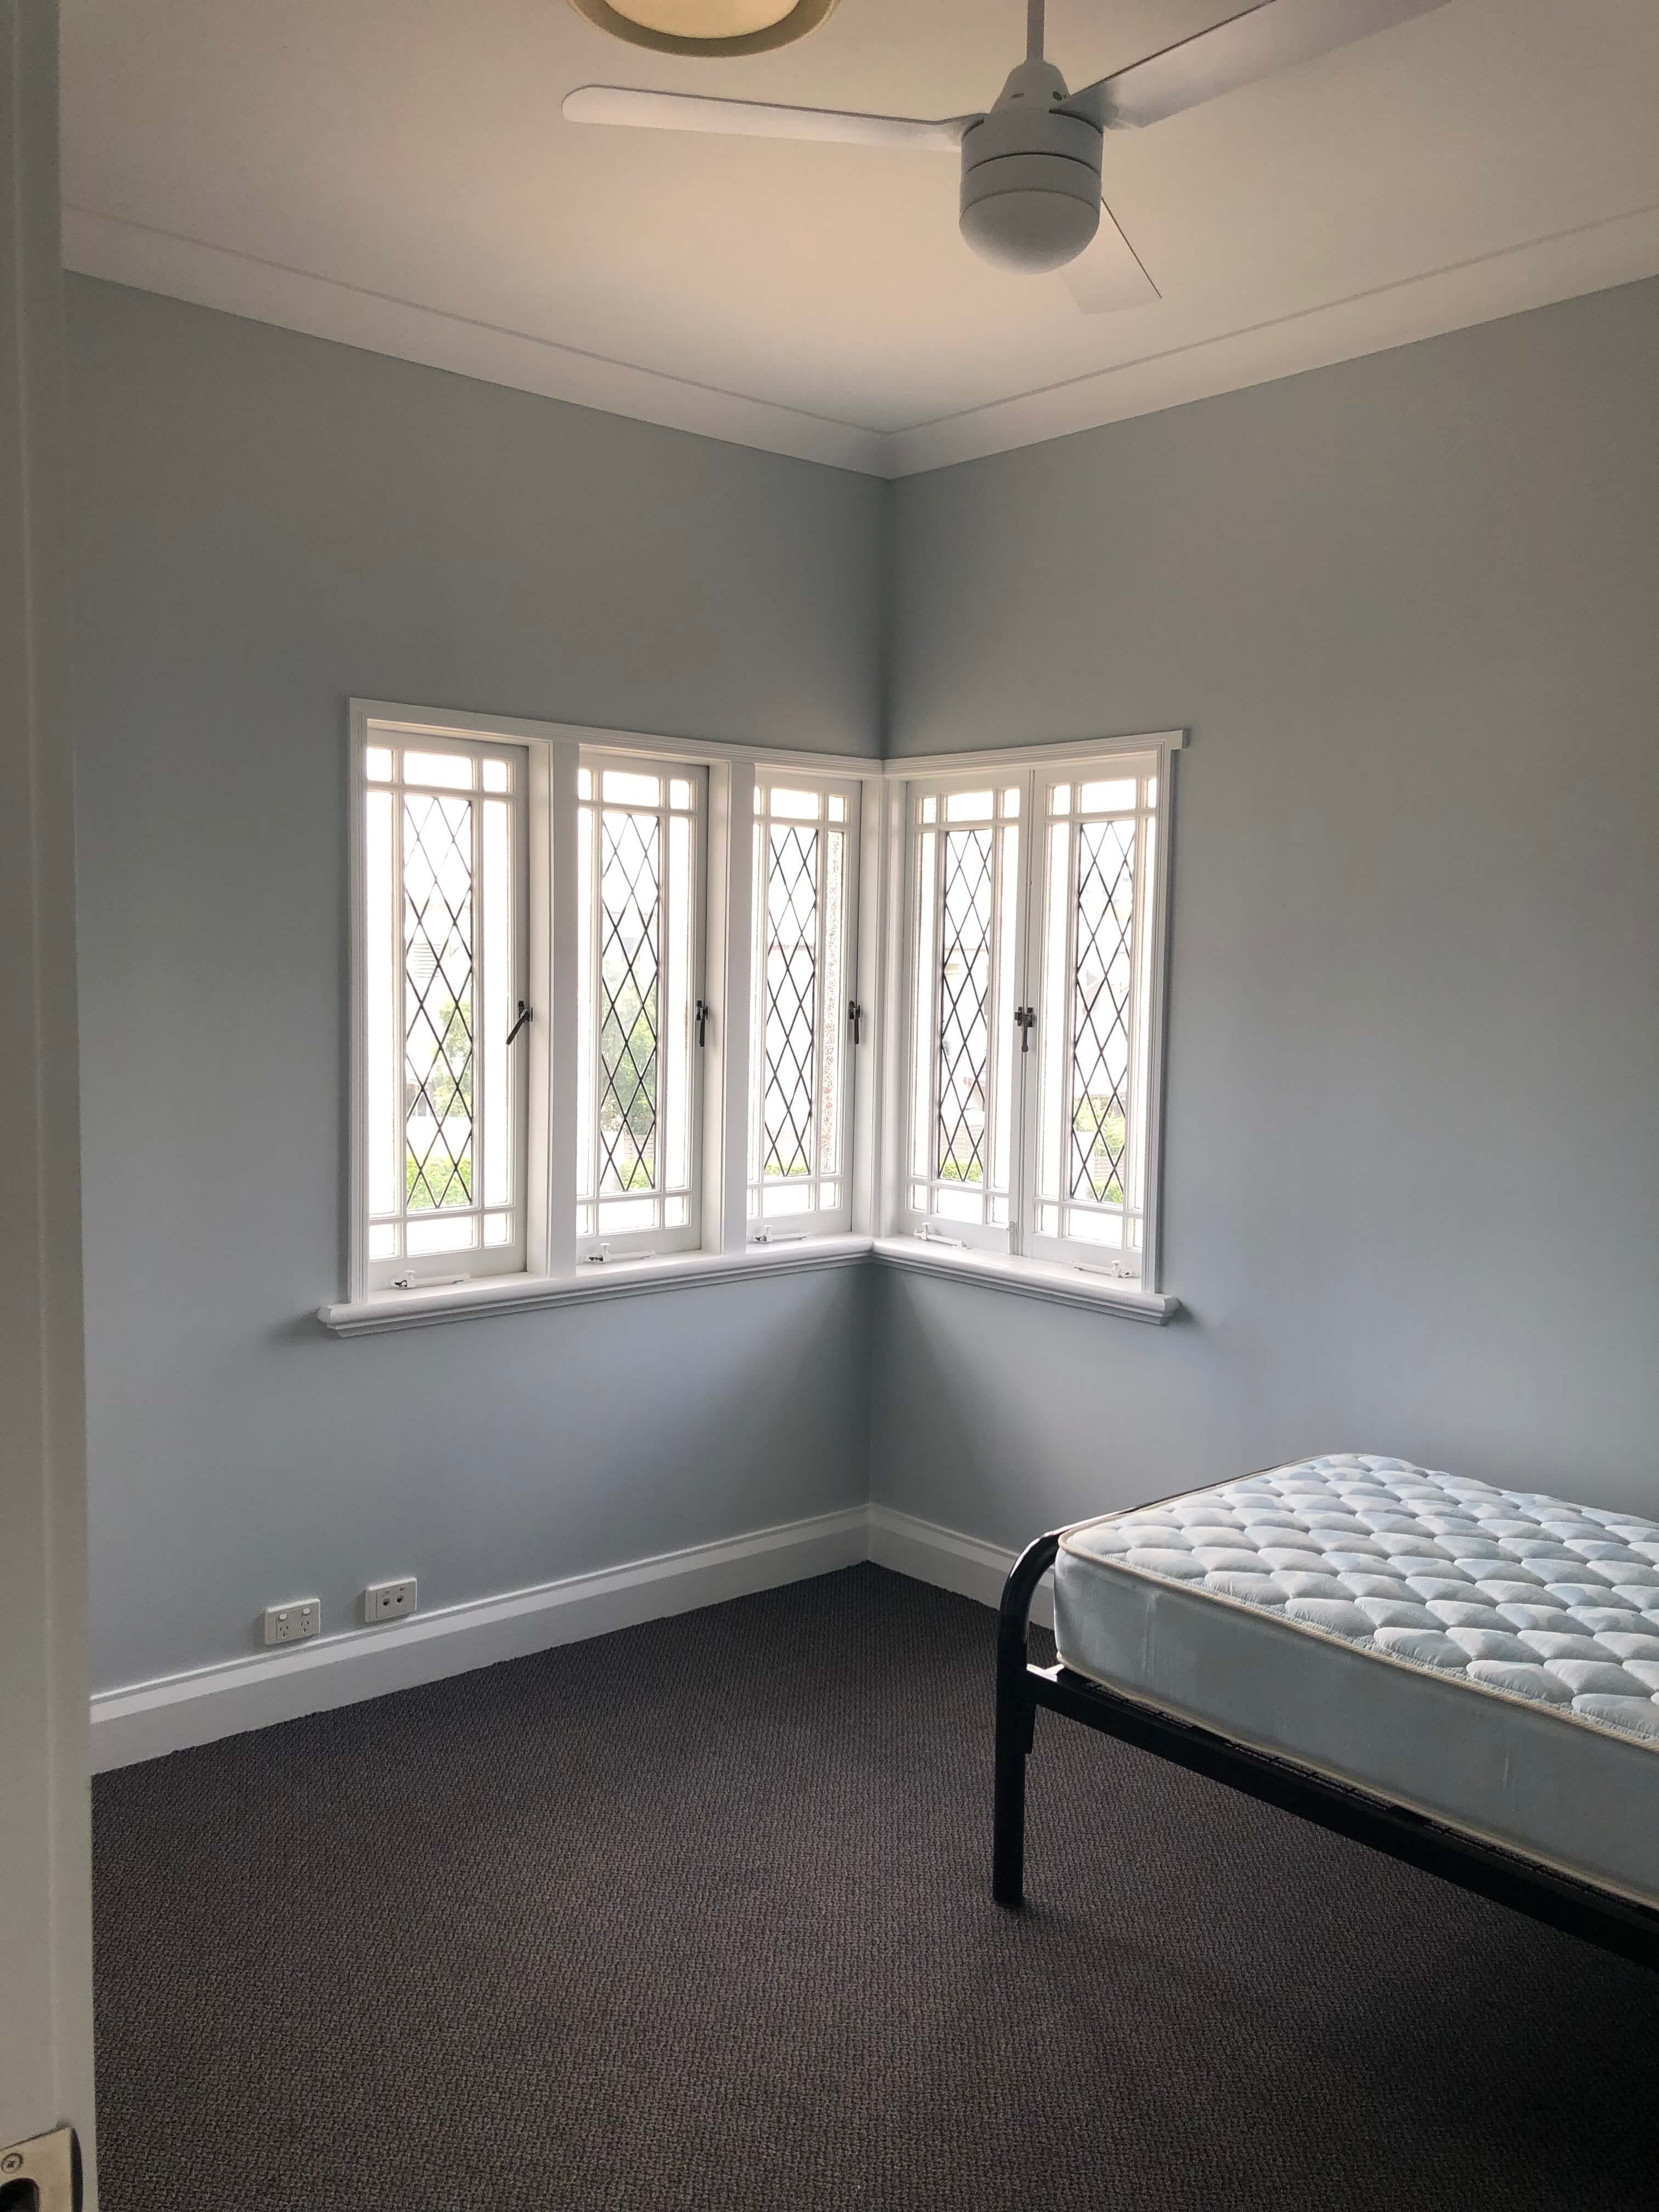 completed building maintenance in Brisbane view of newly refurbished bedroom interior view from door single bed against walls with corner window and ceiling fan 